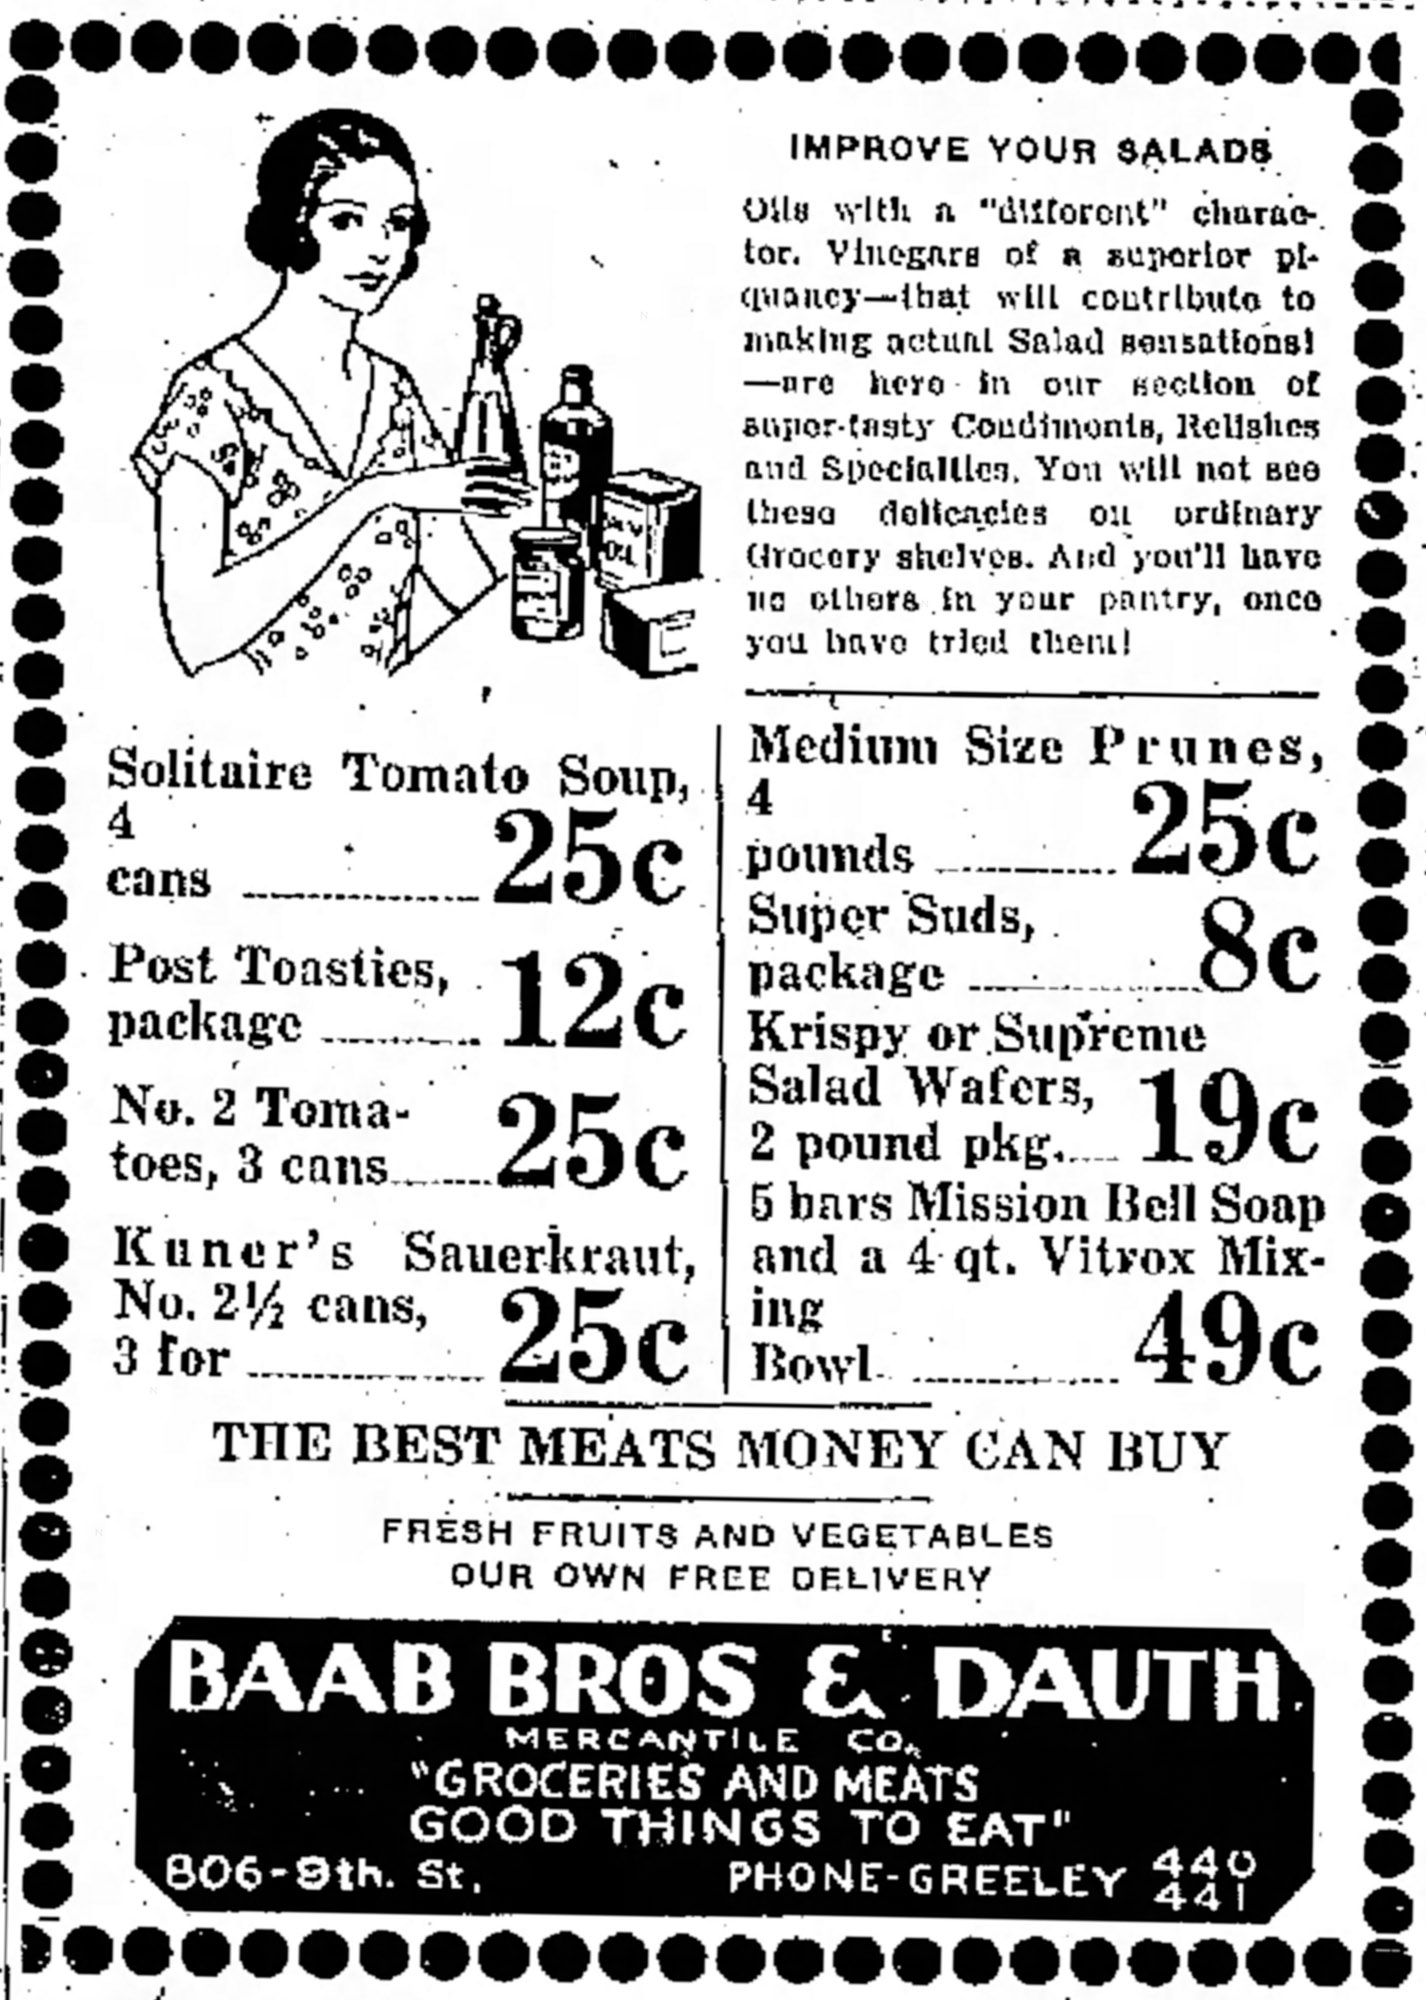 Dauth Family Archive - 1933-02-03 - Greeley Daily Tribune - Baab Bros and Dauth Advertisement